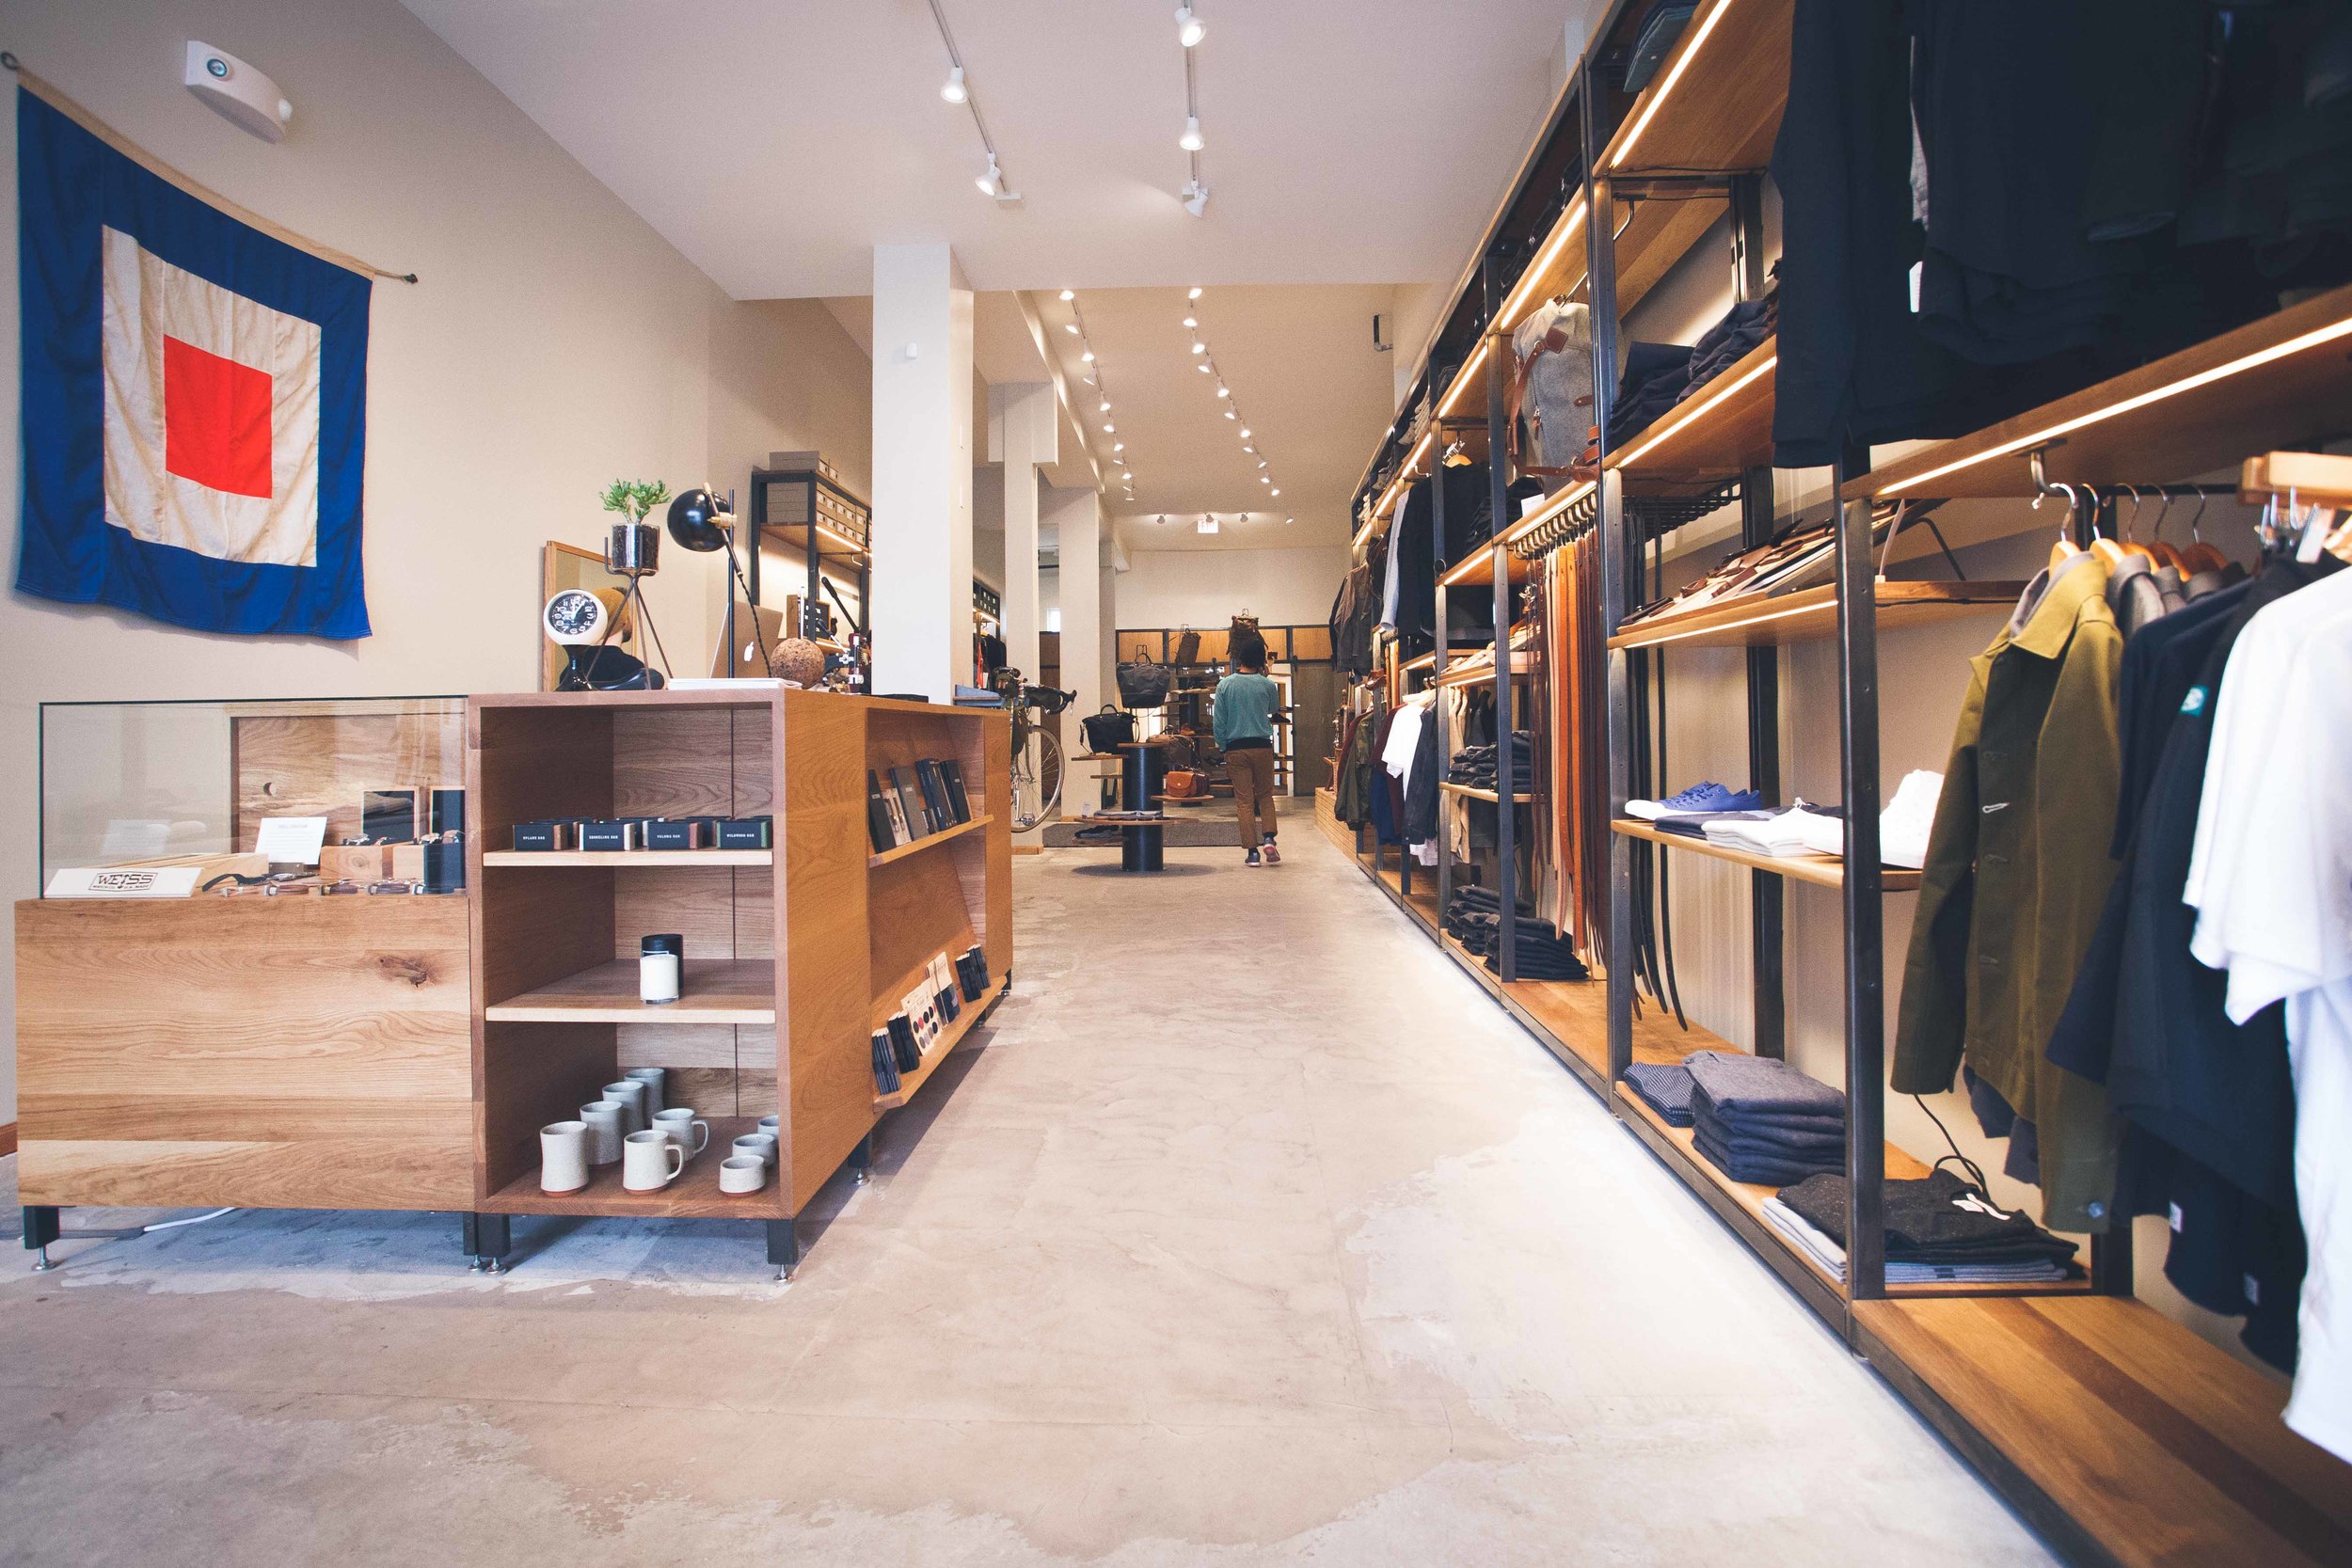 Retail Clothing & Leather Goods Display | Casework Interior Design | Portland, OR